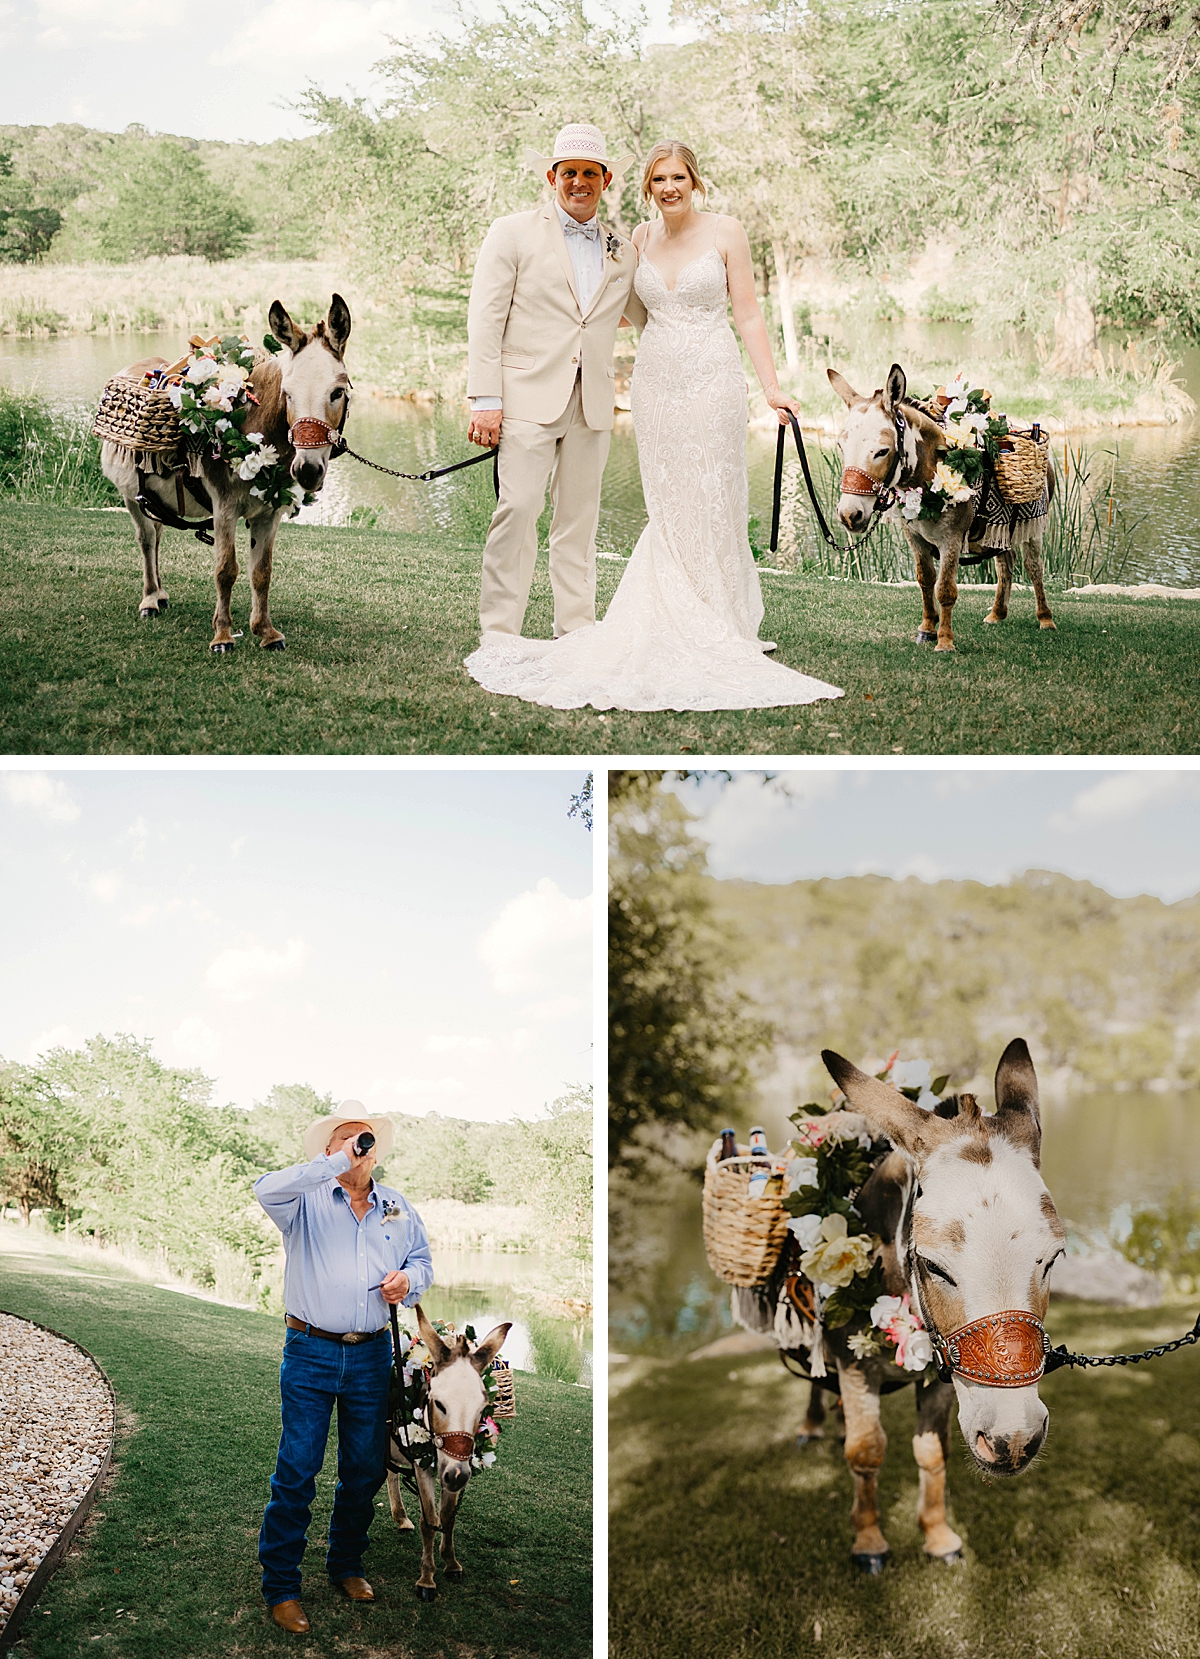 Beer Burros at Wedding | High Pines Media | Texas Hill Country Wedding Photographer | The Preserve at Canyon Lake | wedding ideas for summer, classic wedding, wedding details | via highpinesmedia.com